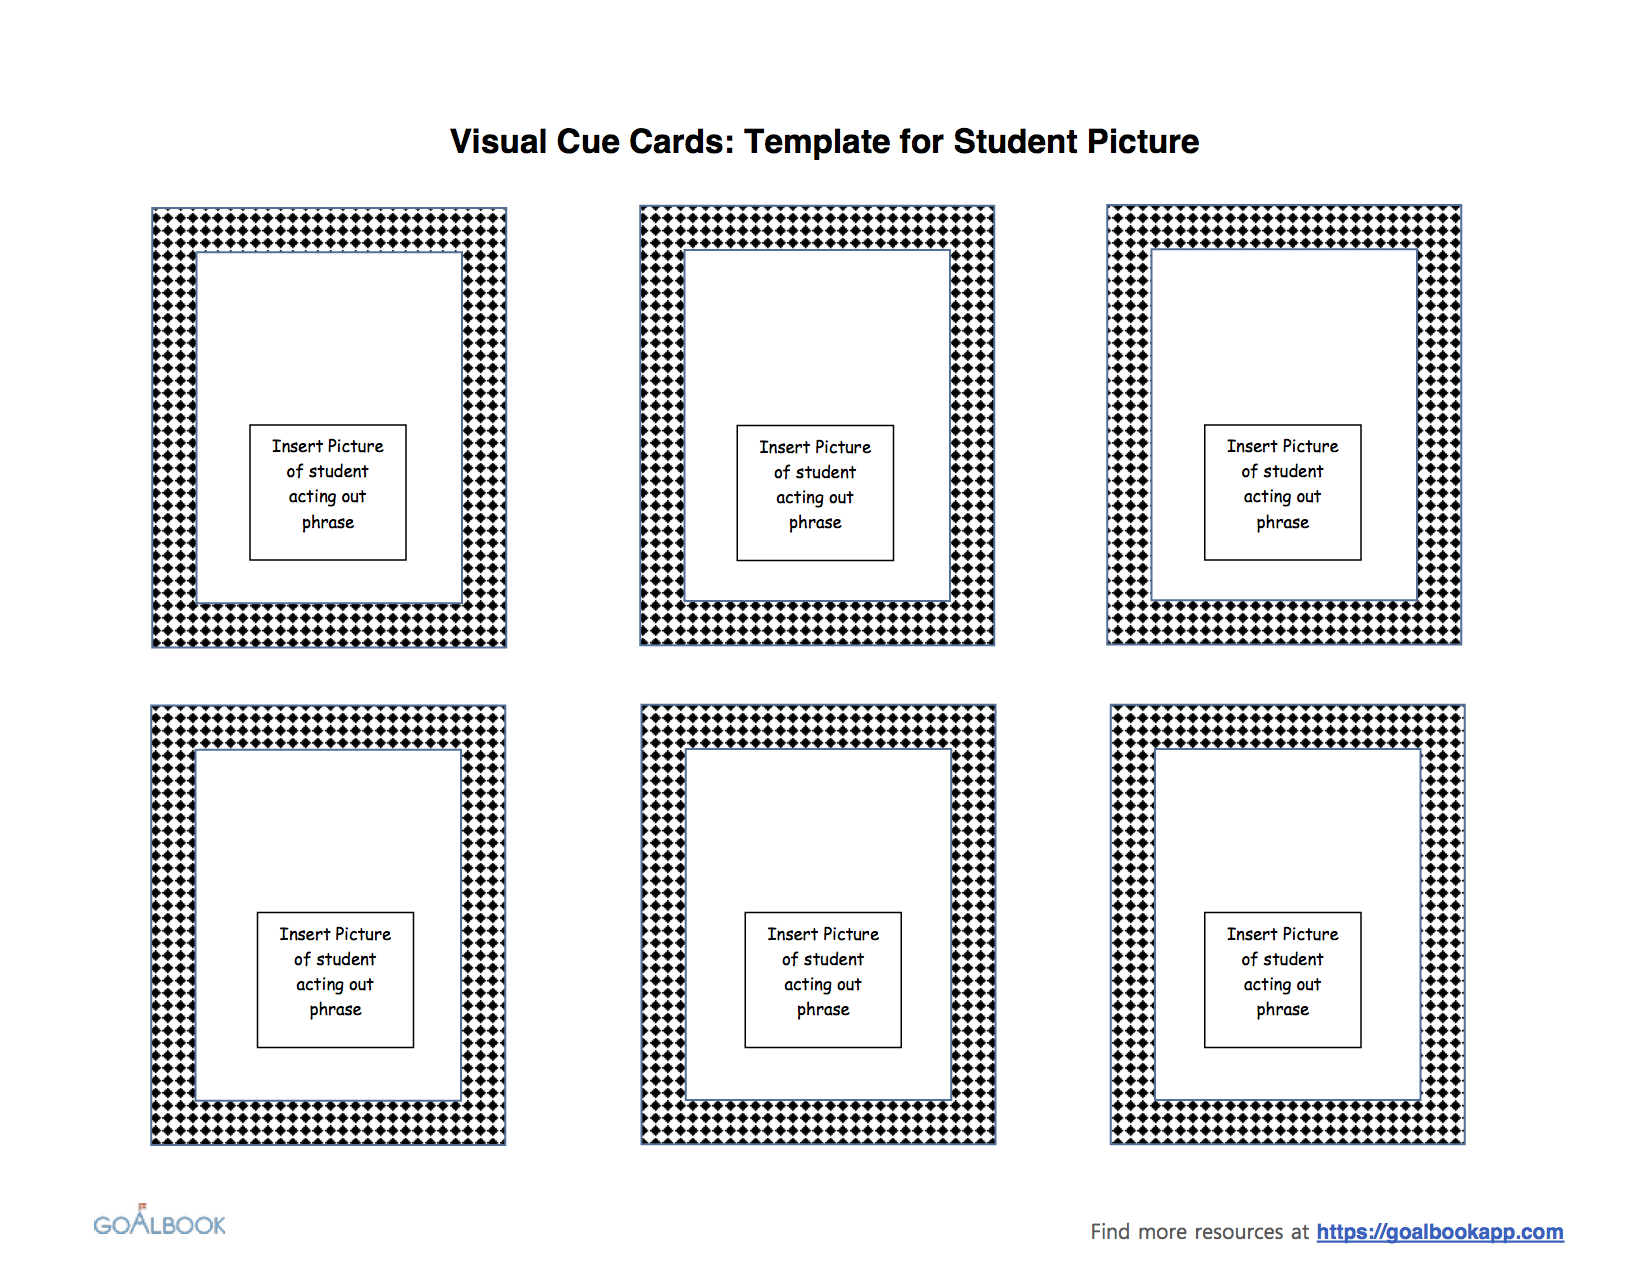 Visual Cue Cards | Udl Strategies – Goalbook Toolkit Intended For Cue Card Template